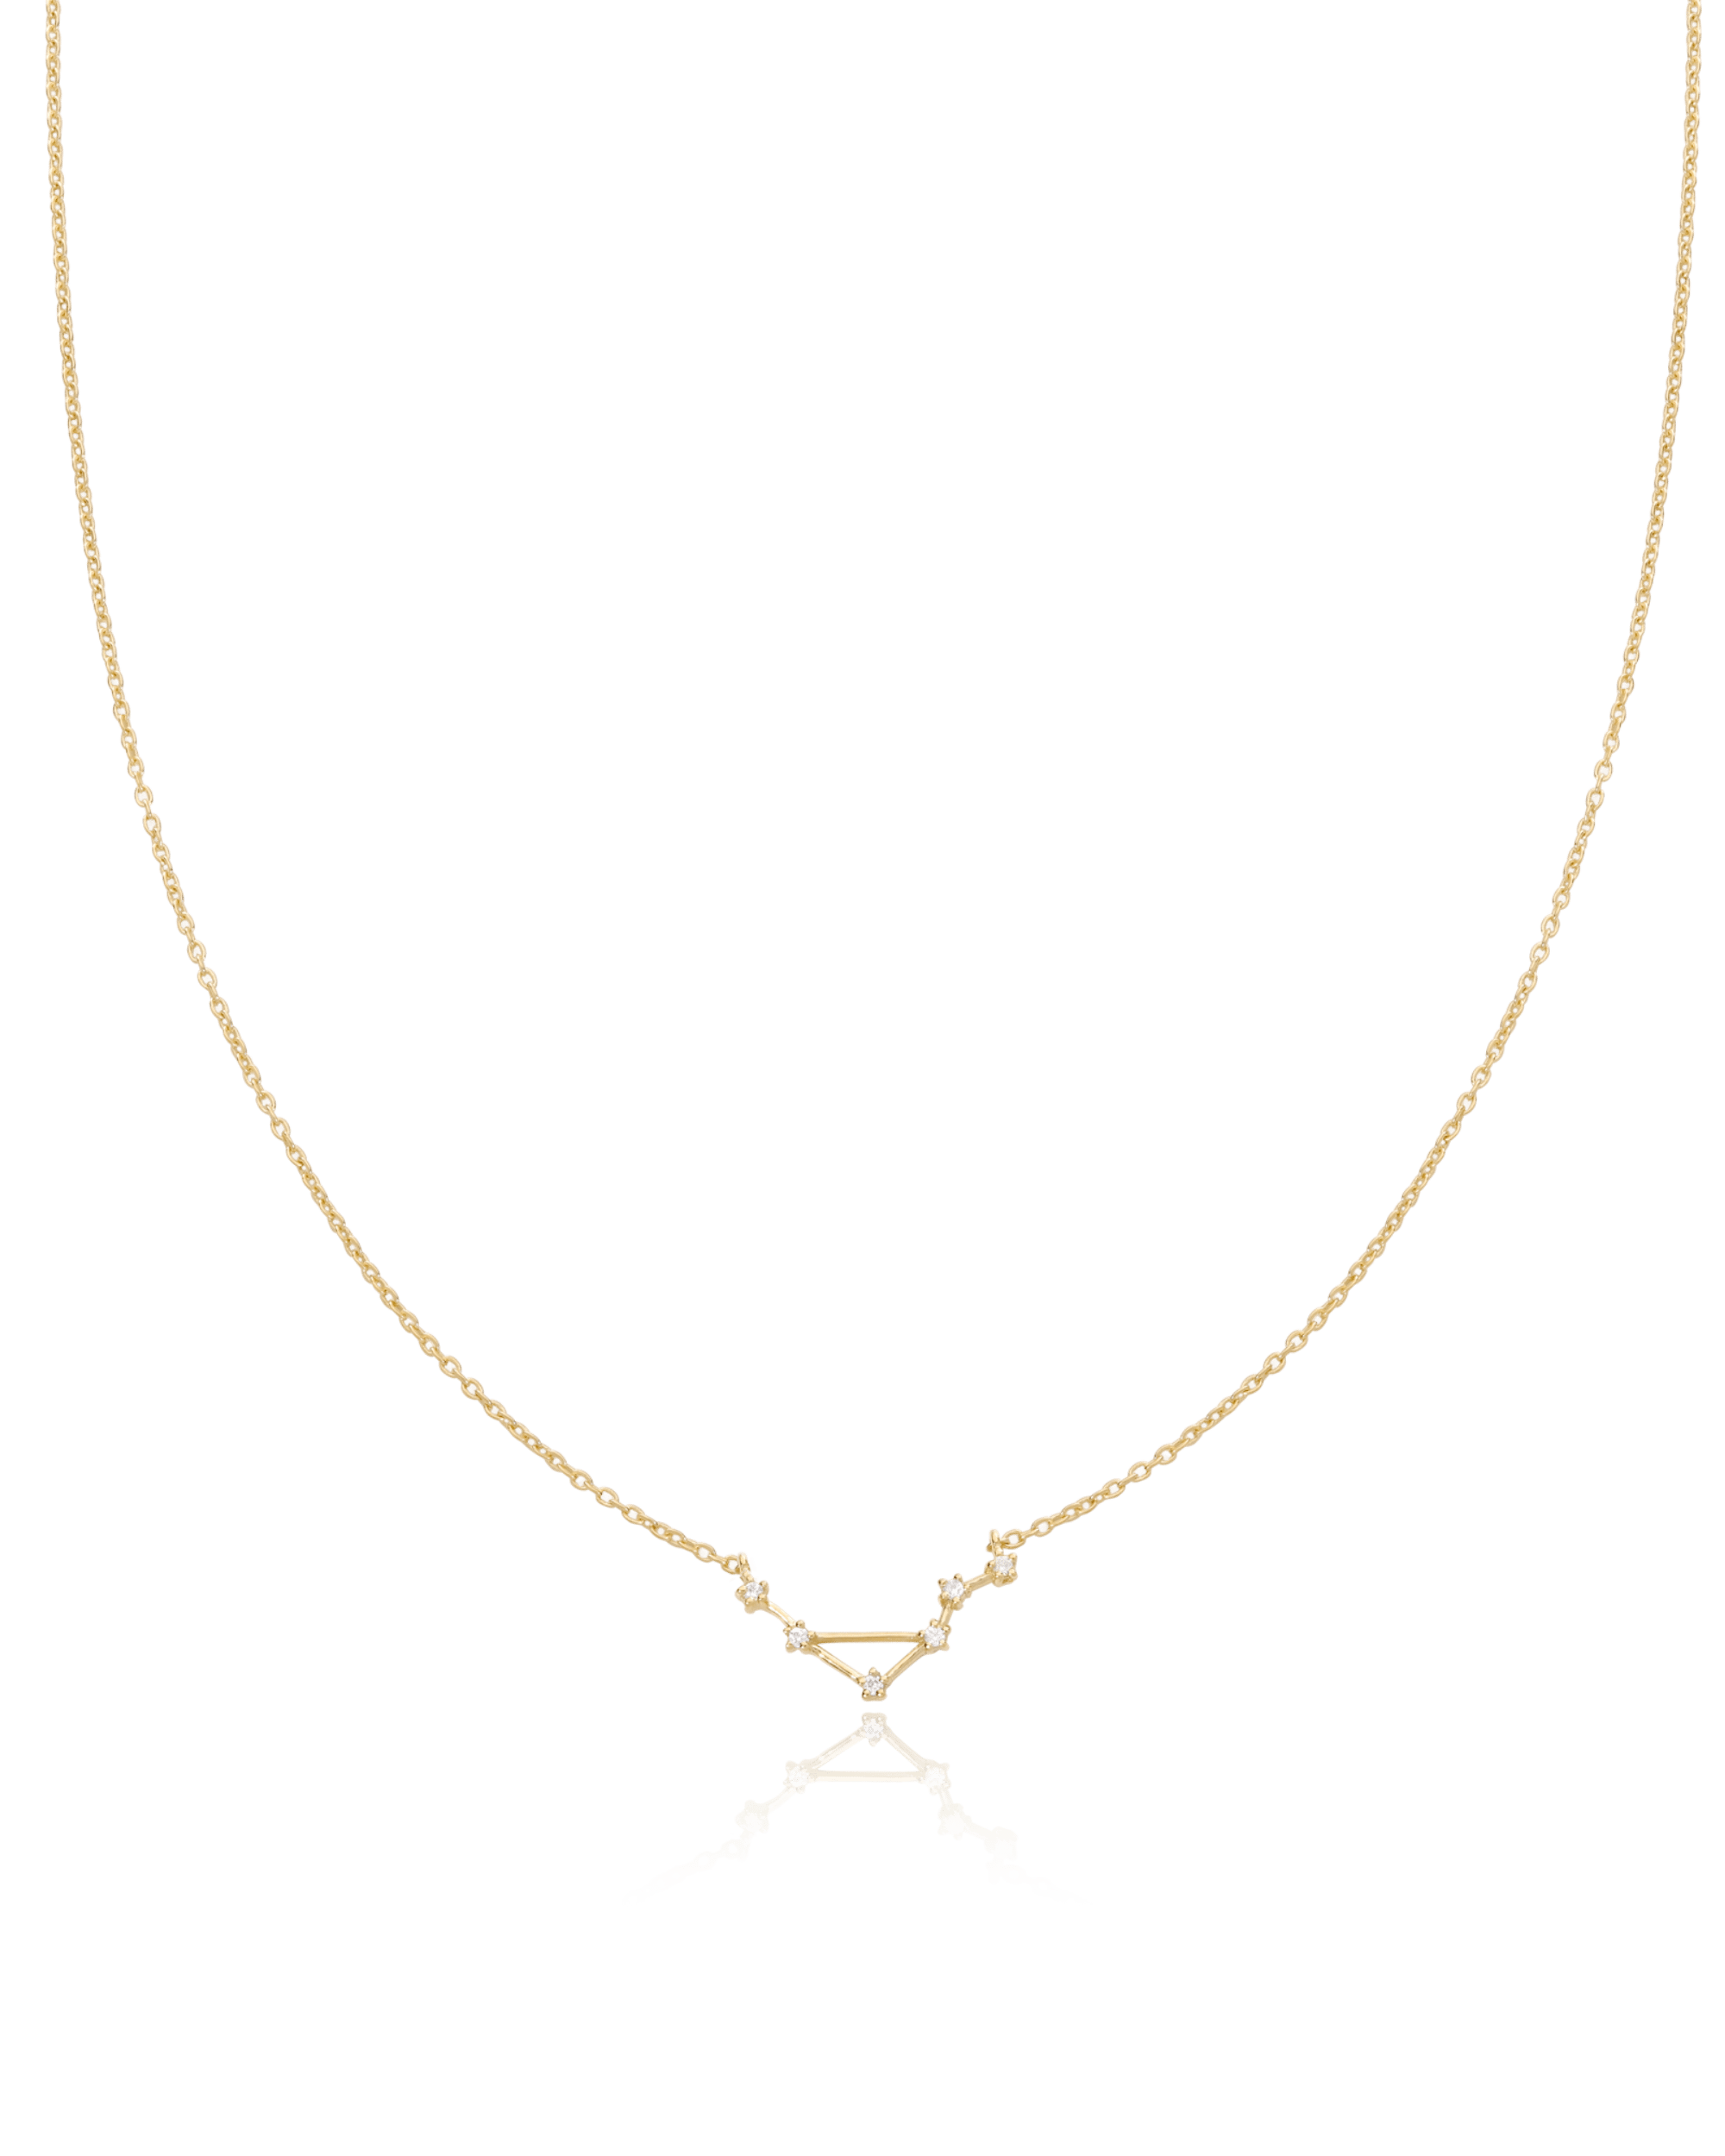 Single Constellation Necklace with Diamonds - 18K Gold Vermeil Necklaces magal-dev Aquarius (January 20 – February 18) 16" 